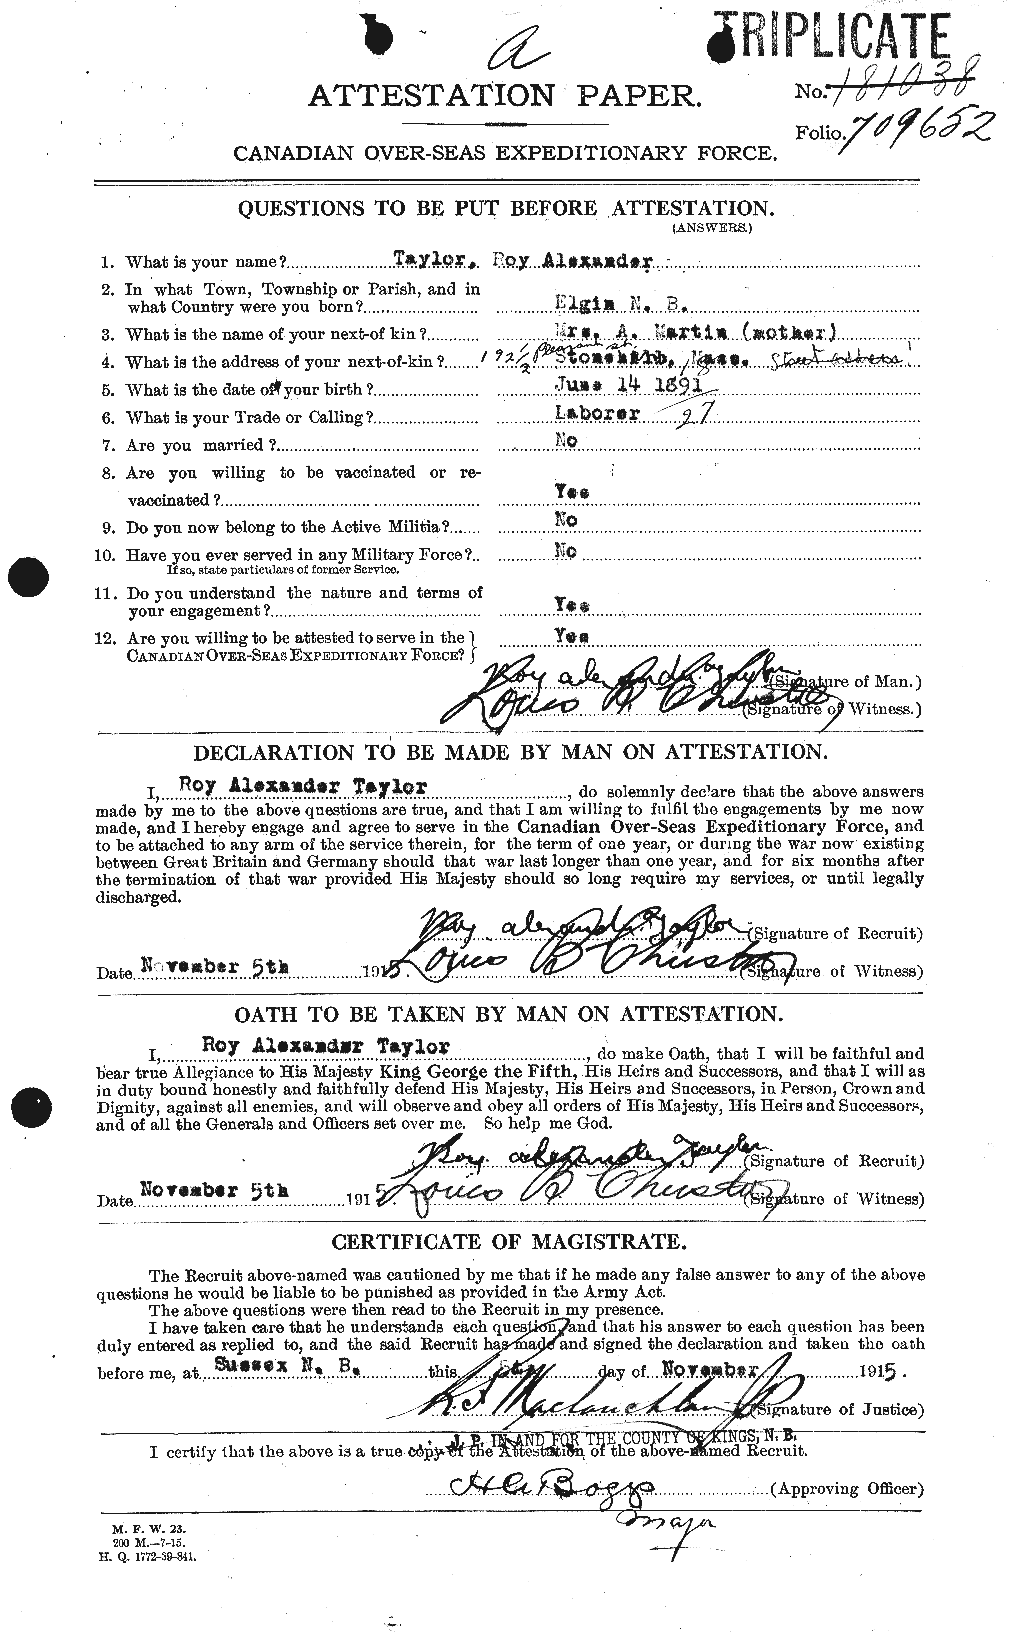 Personnel Records of the First World War - CEF 627525a